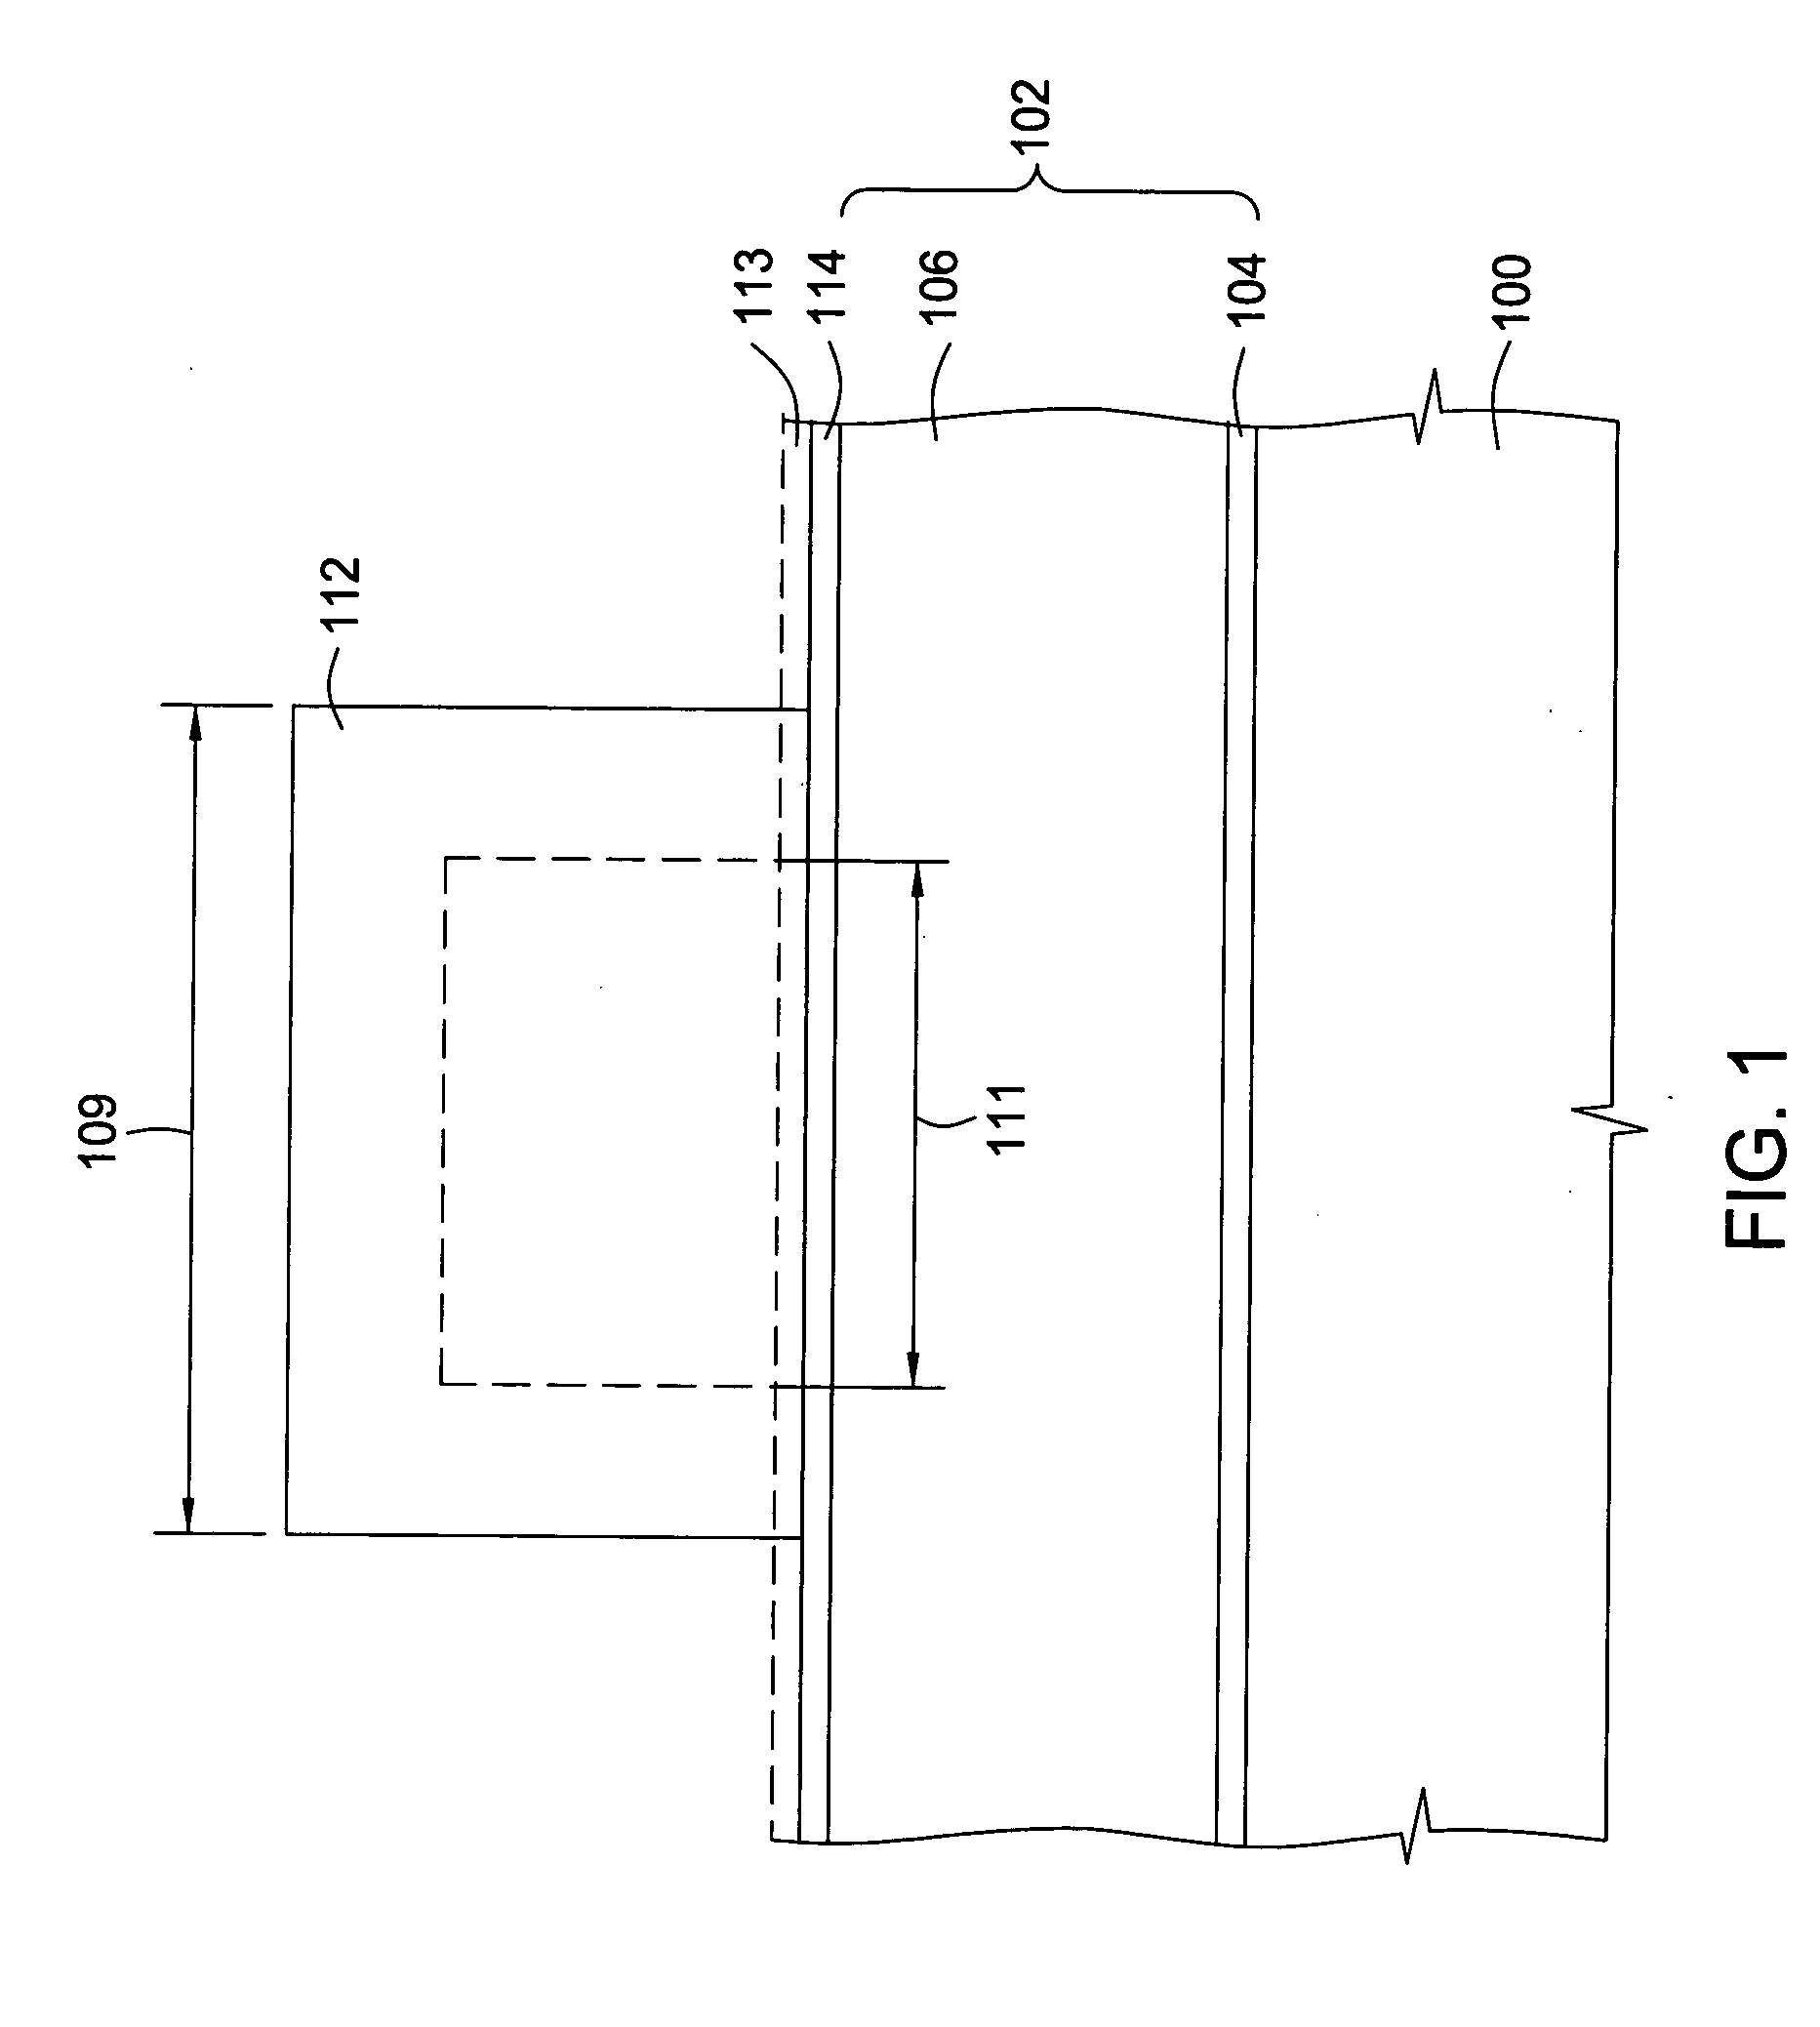 Method of controlling critical dimension microloading of photoresist trimming process by selective sidewall polymer deposition